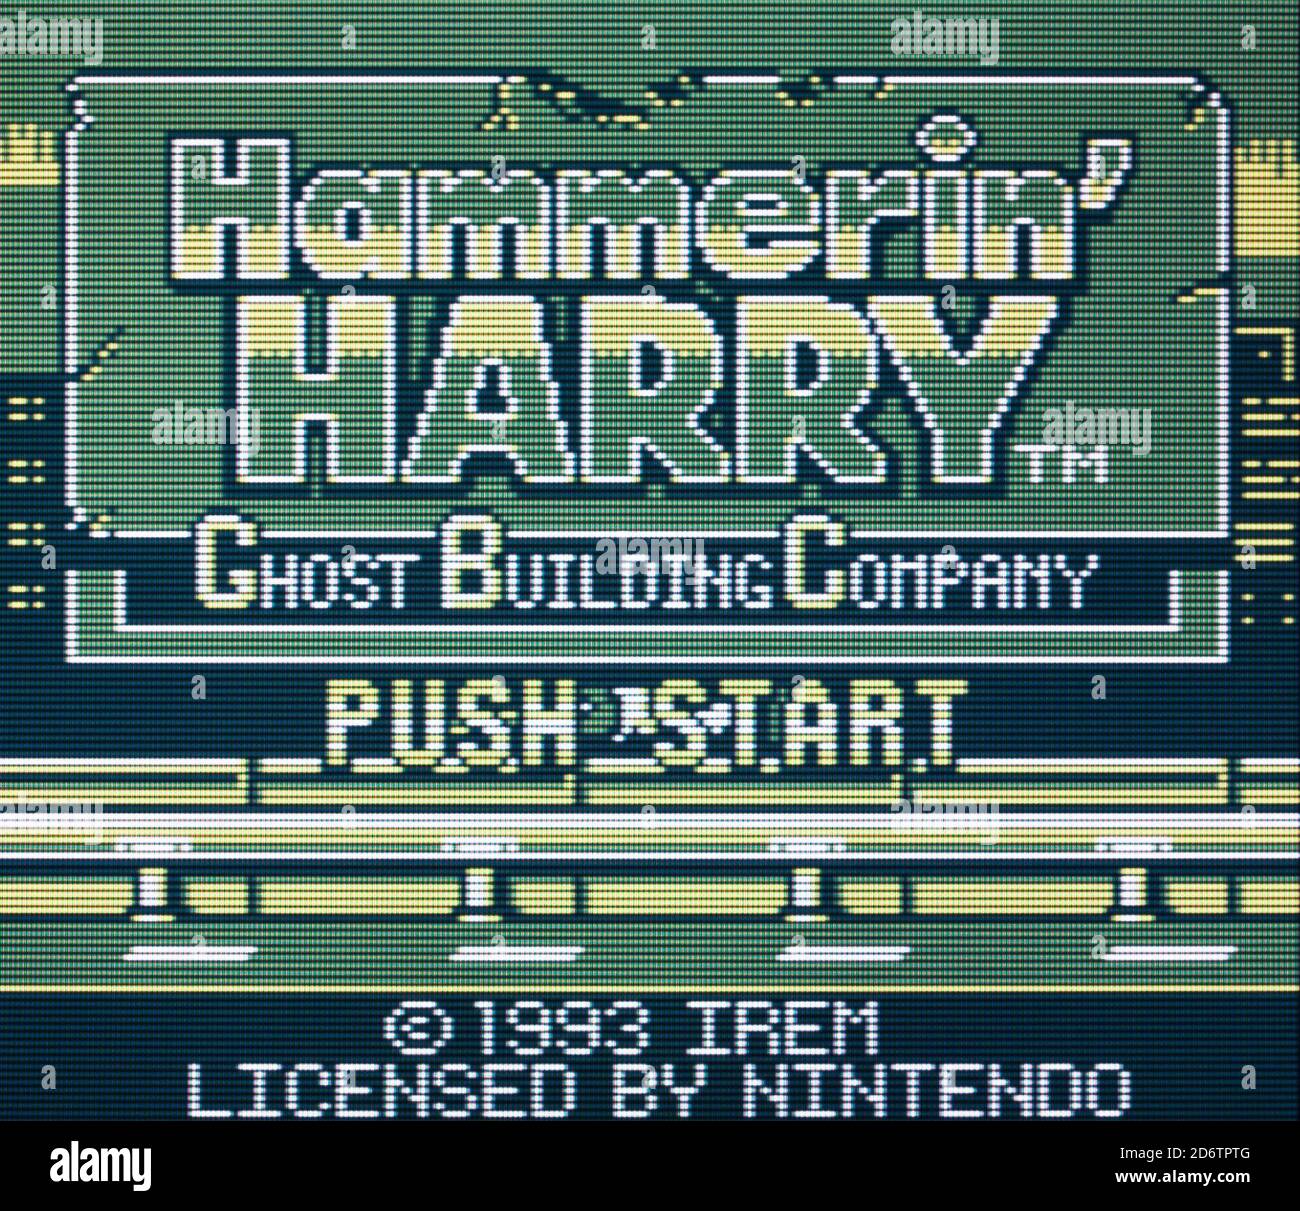 Hammerin' Harry - Nintendo Gameboy Videogame - Editorial use only Stock Photo